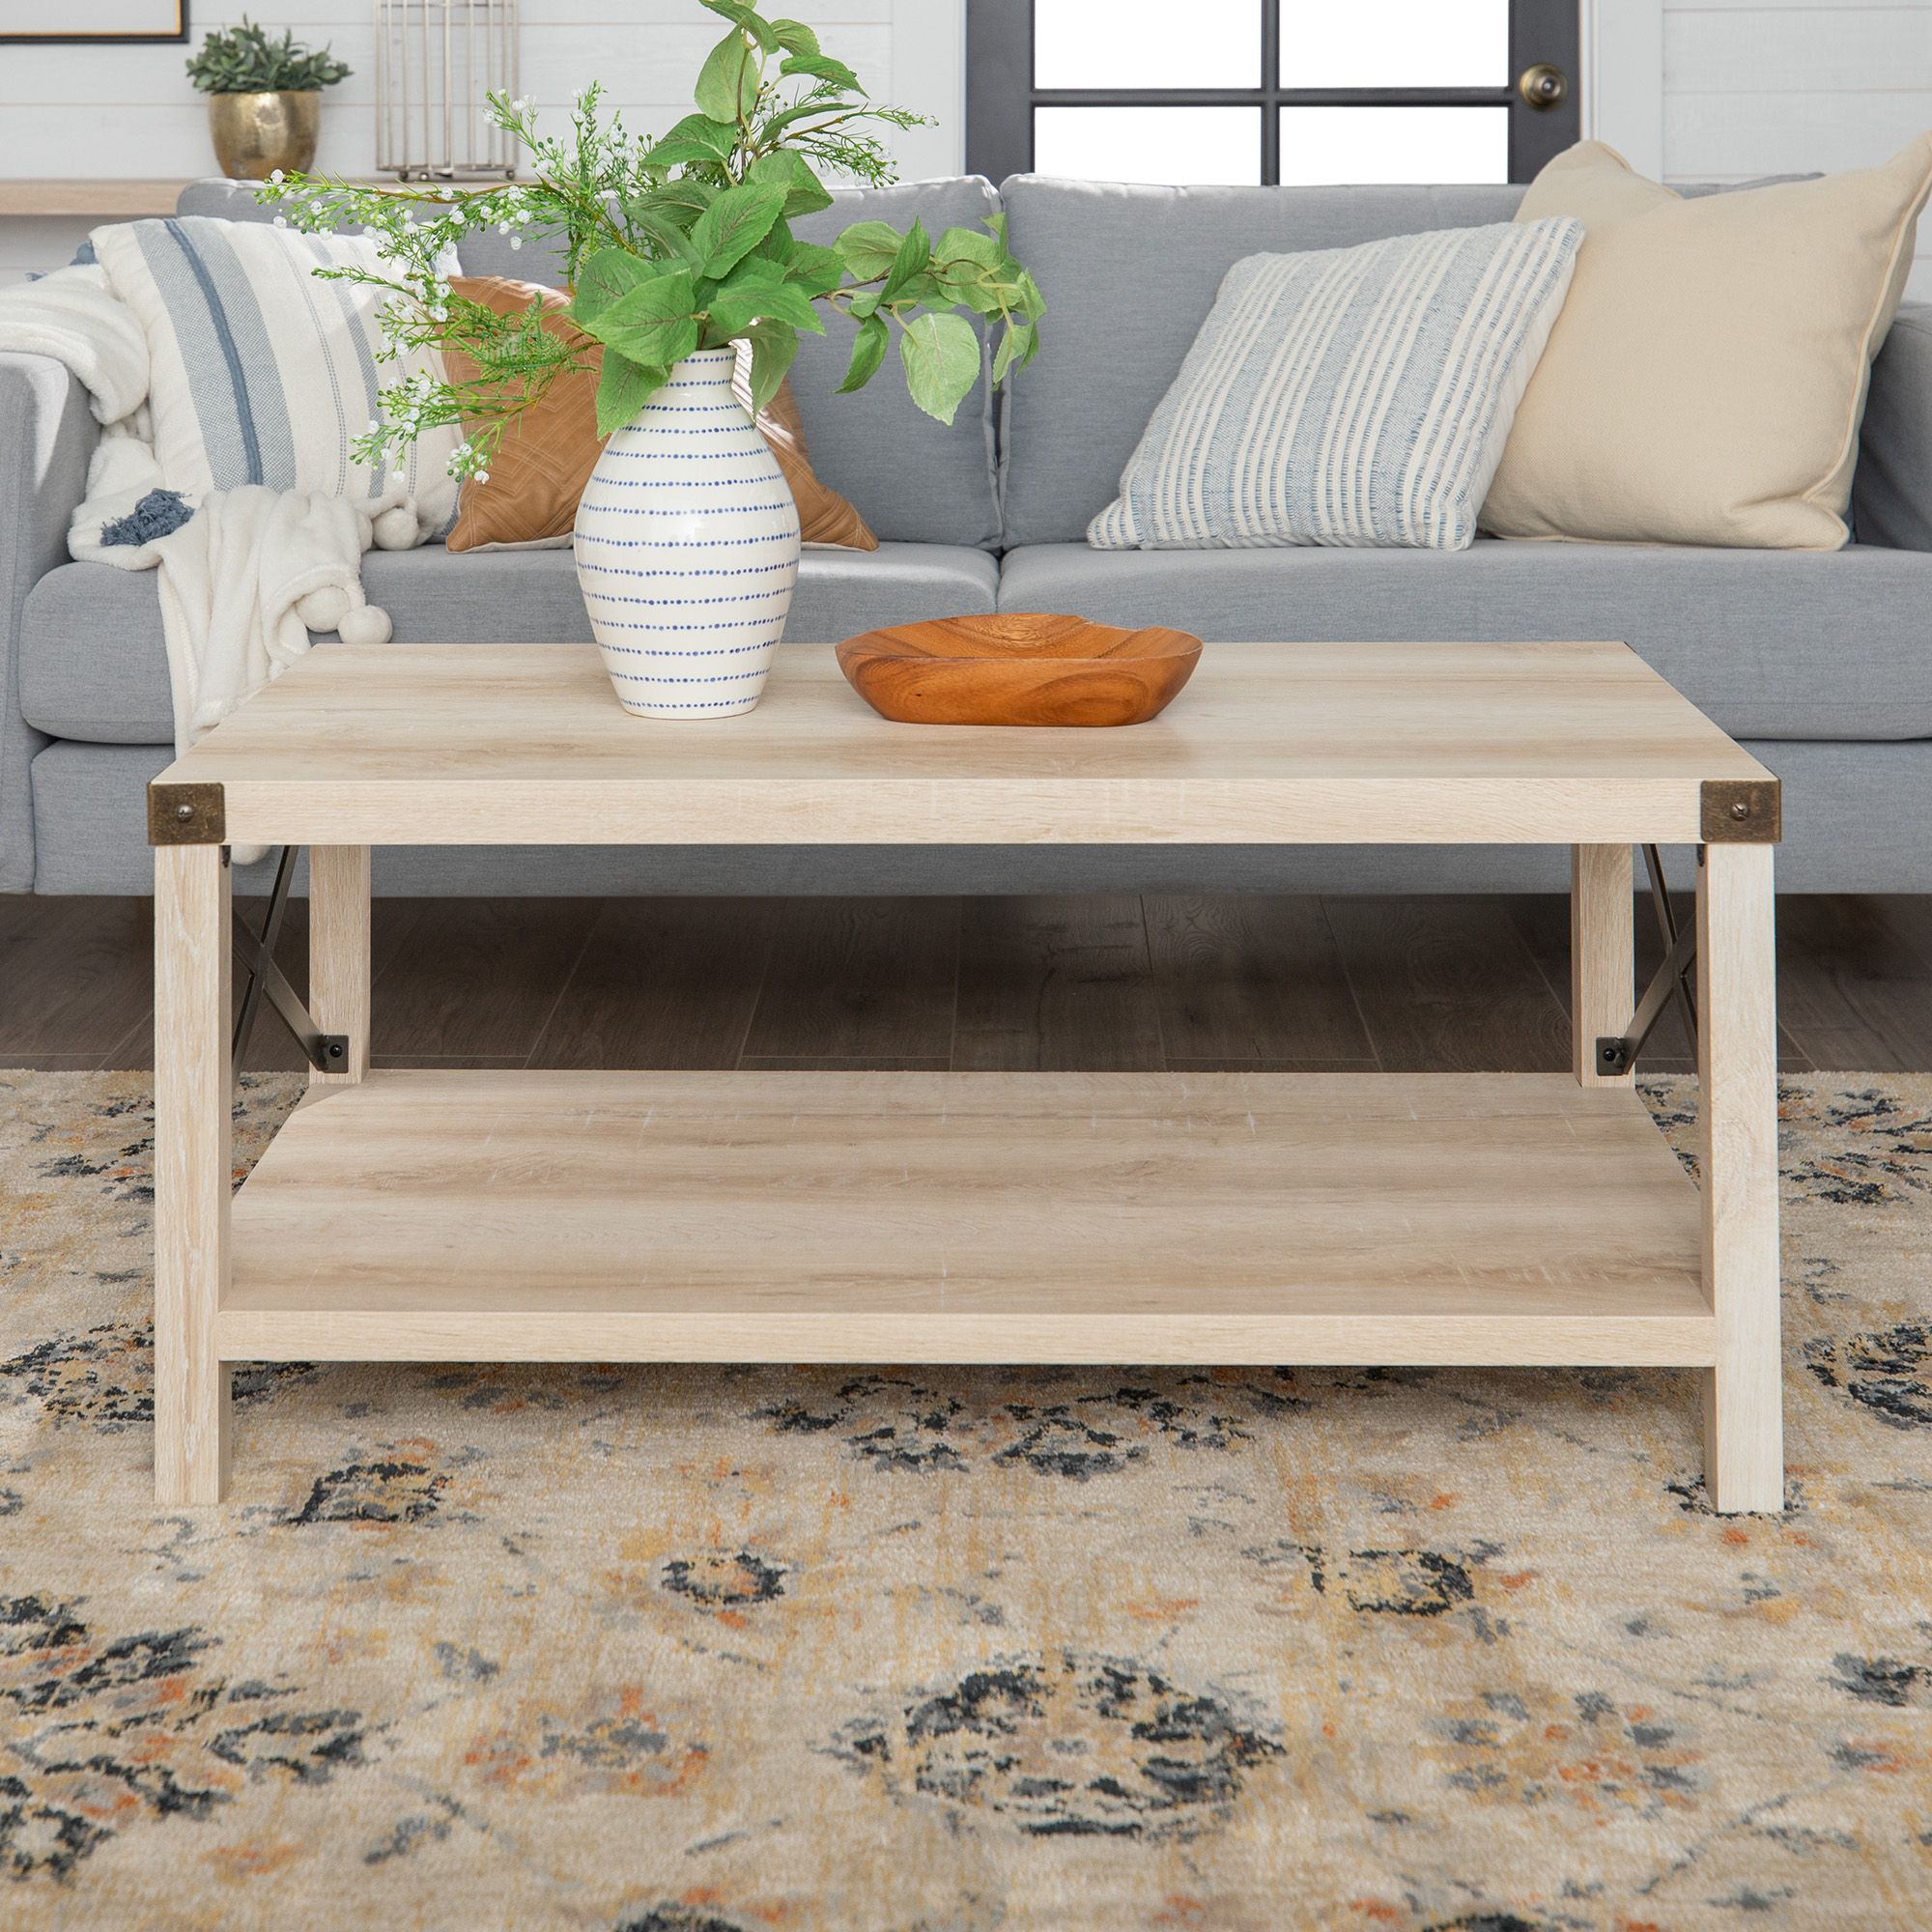 Manor Park 3 Piece Rustic Wood & Metal Coffee Table Set Pertaining To Oak Wood And Metal Legs Coffee Tables (View 12 of 15)